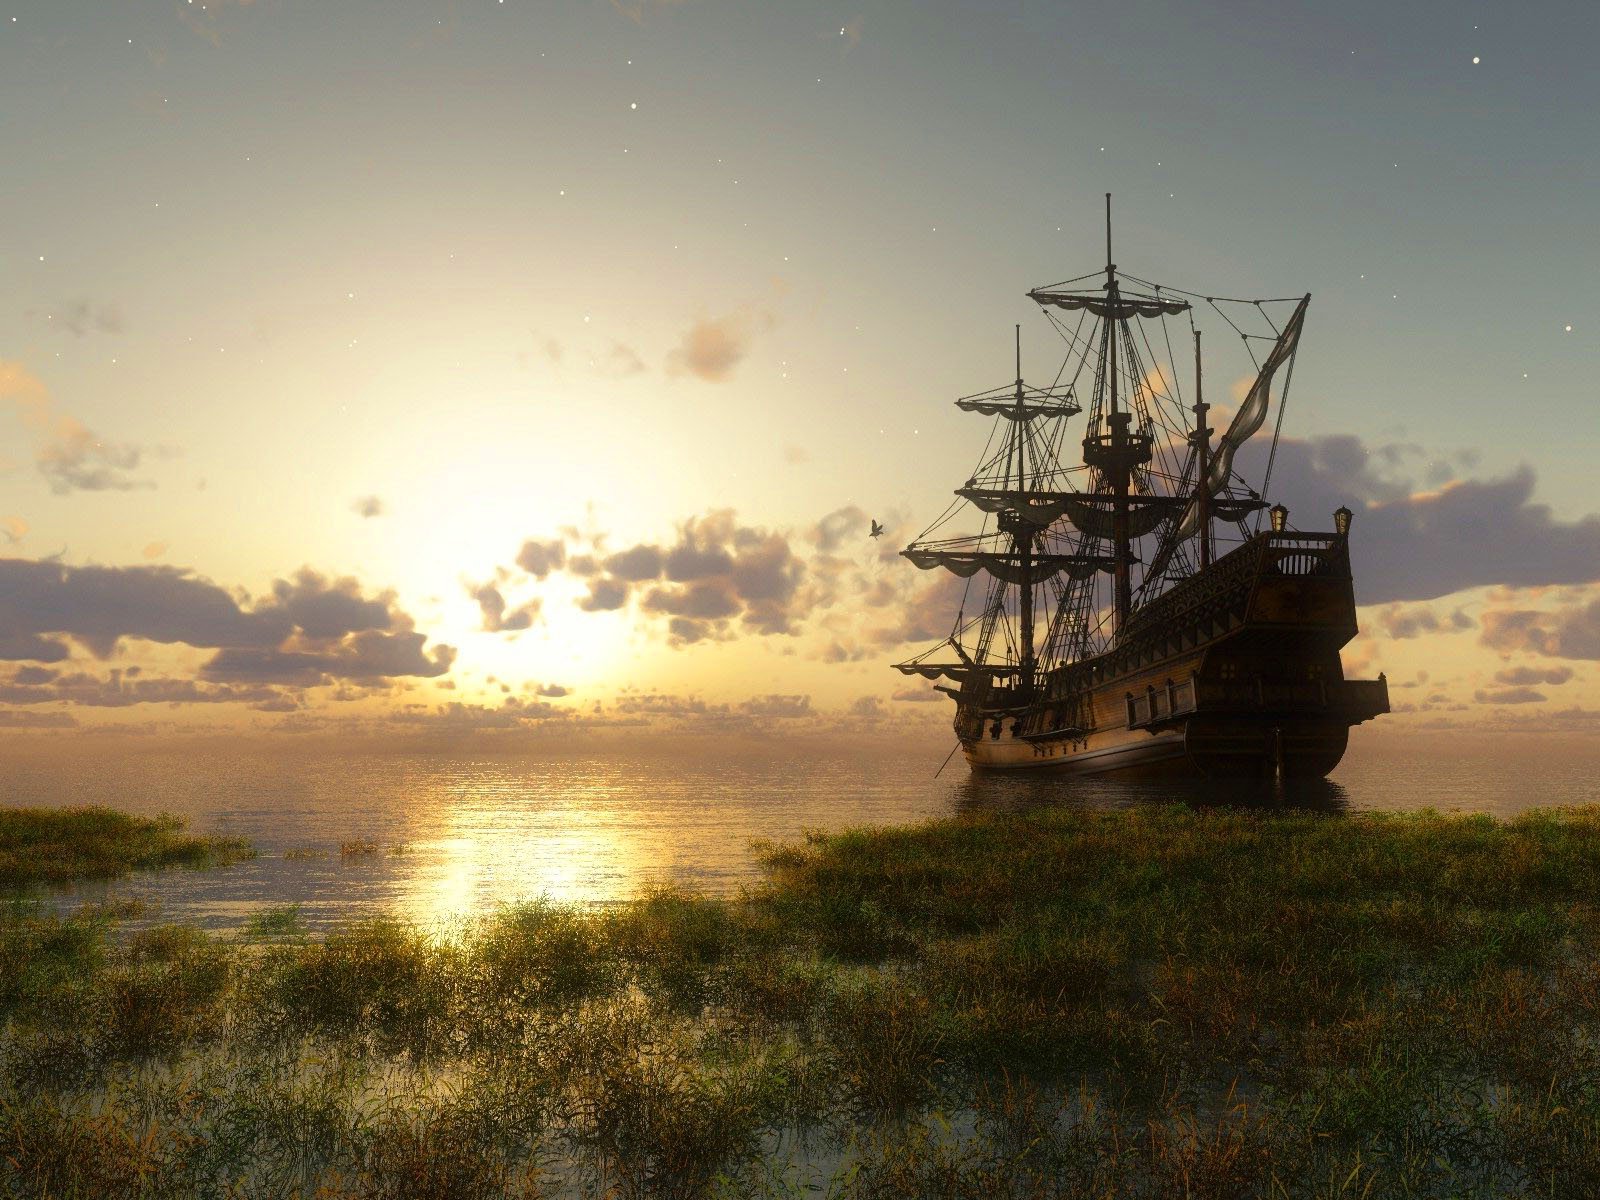 Ship Wallpaper Images in HD Available Here For Download 1600x1200